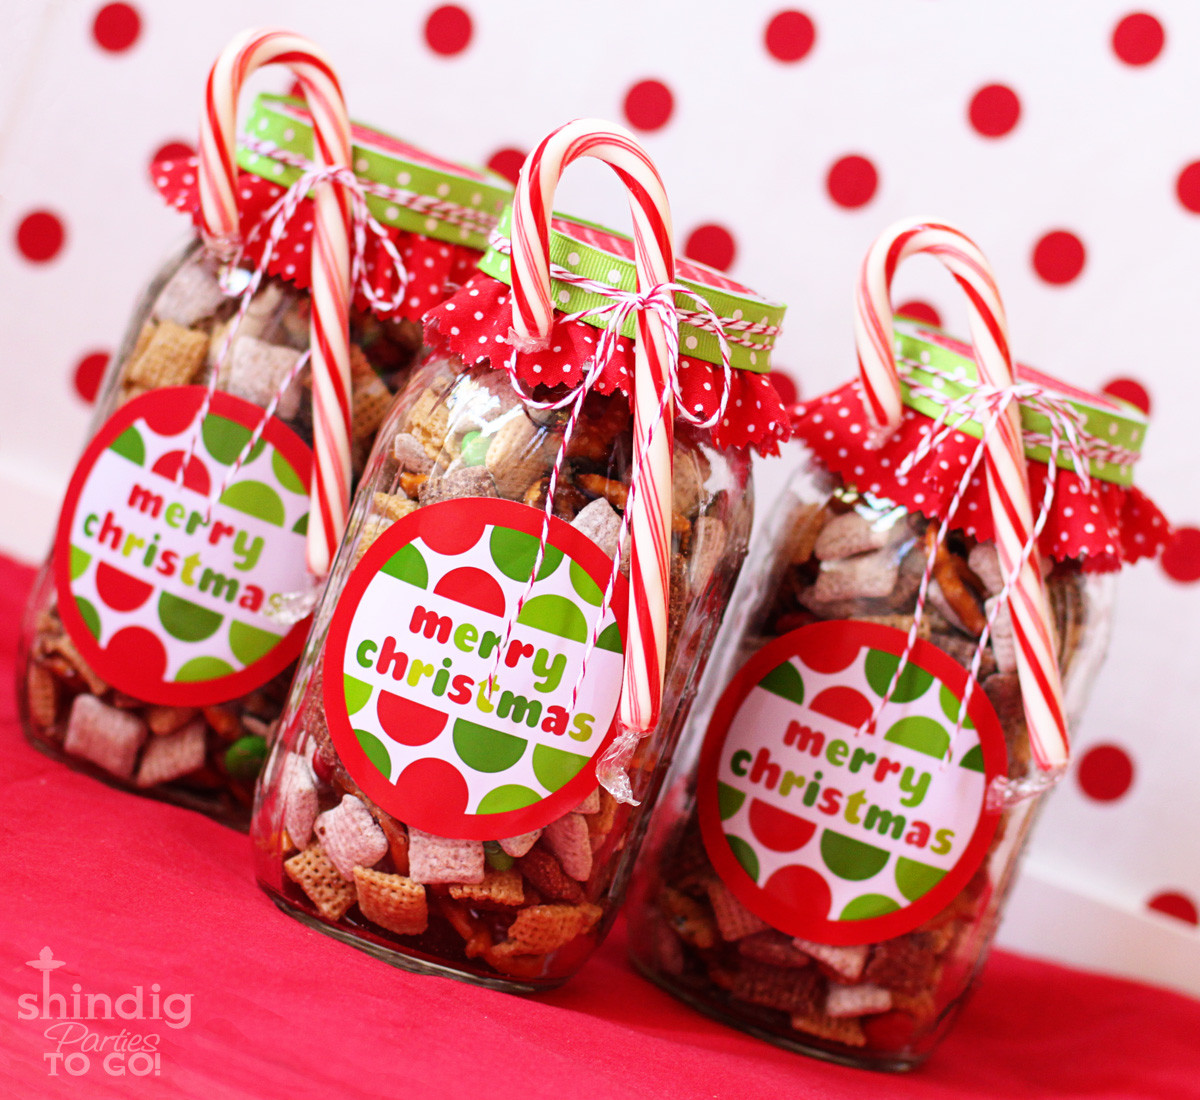 Christmas Candy Gifts
 Amanda s Parties To Go FREE Merry Christmas Tags and Gift